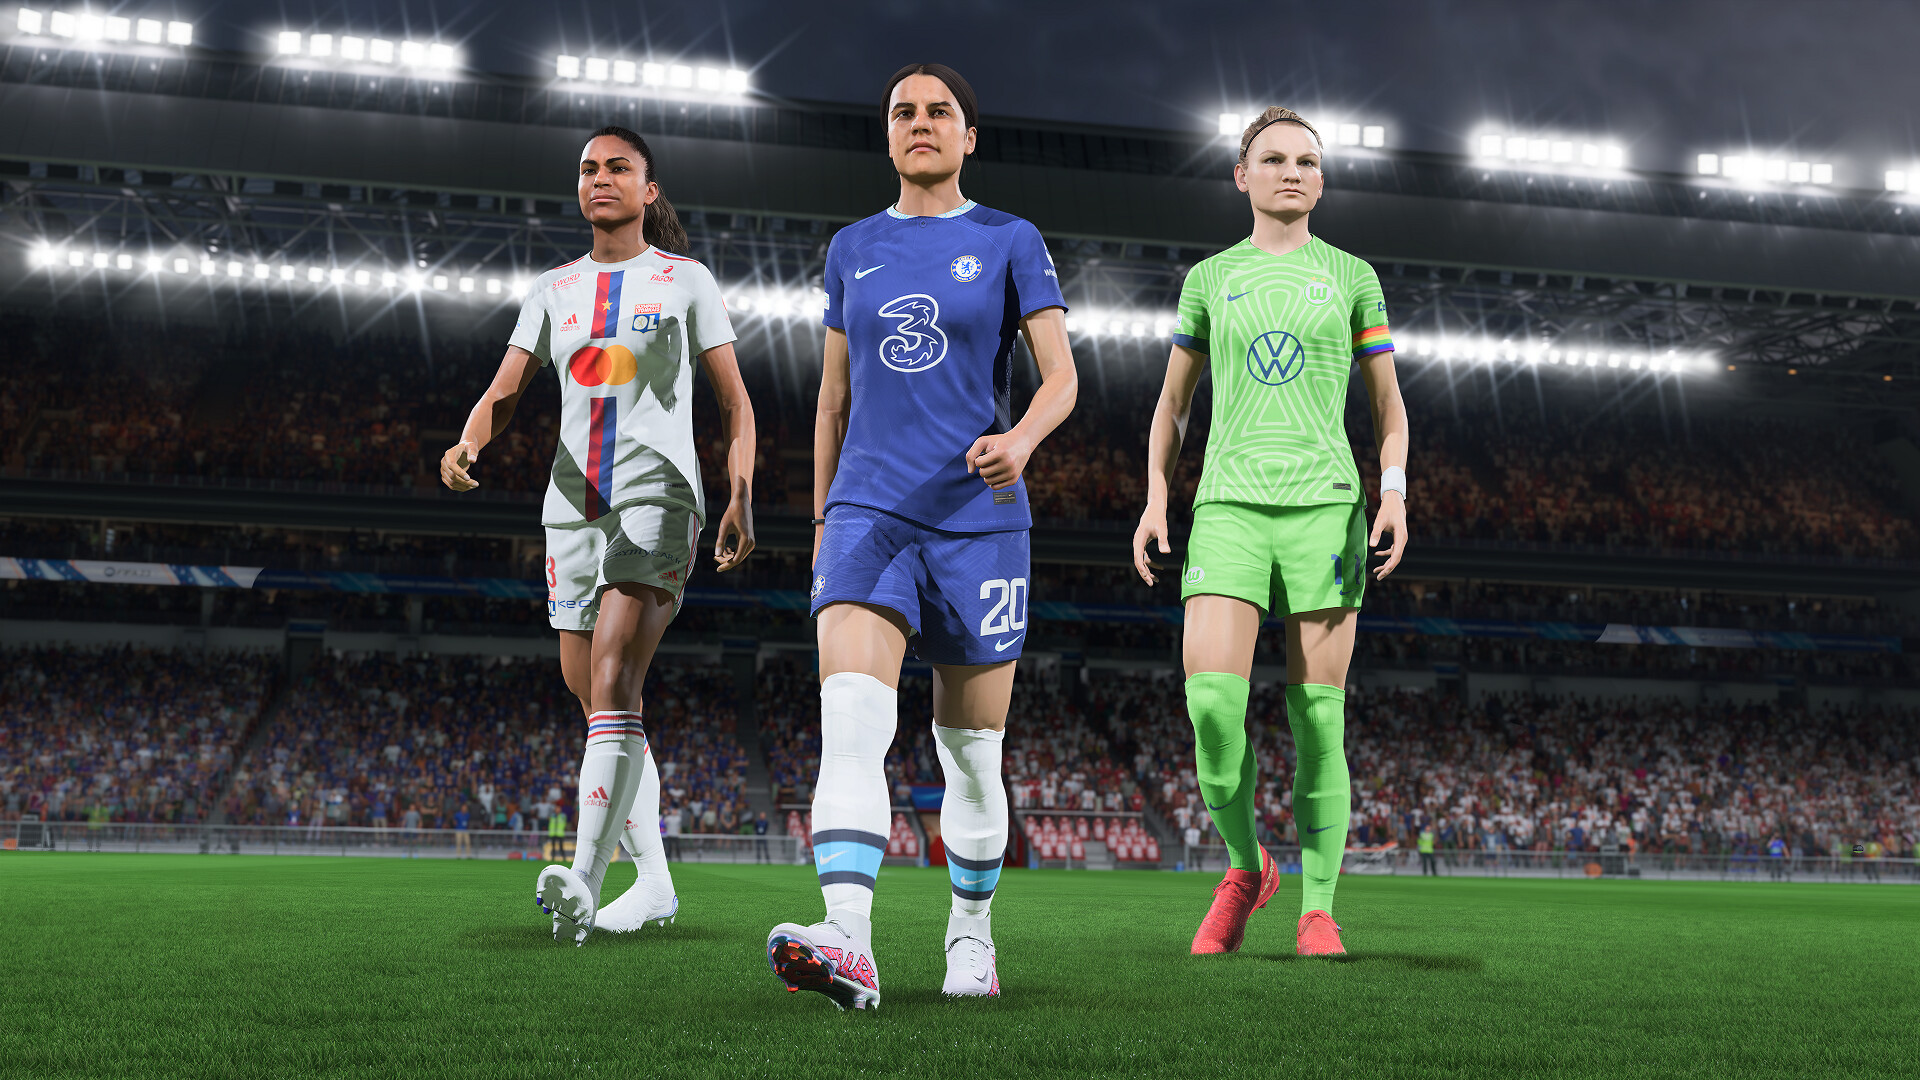 EA SPORTS FIFA 23 - SteamSpy - All the data and stats about Steam games